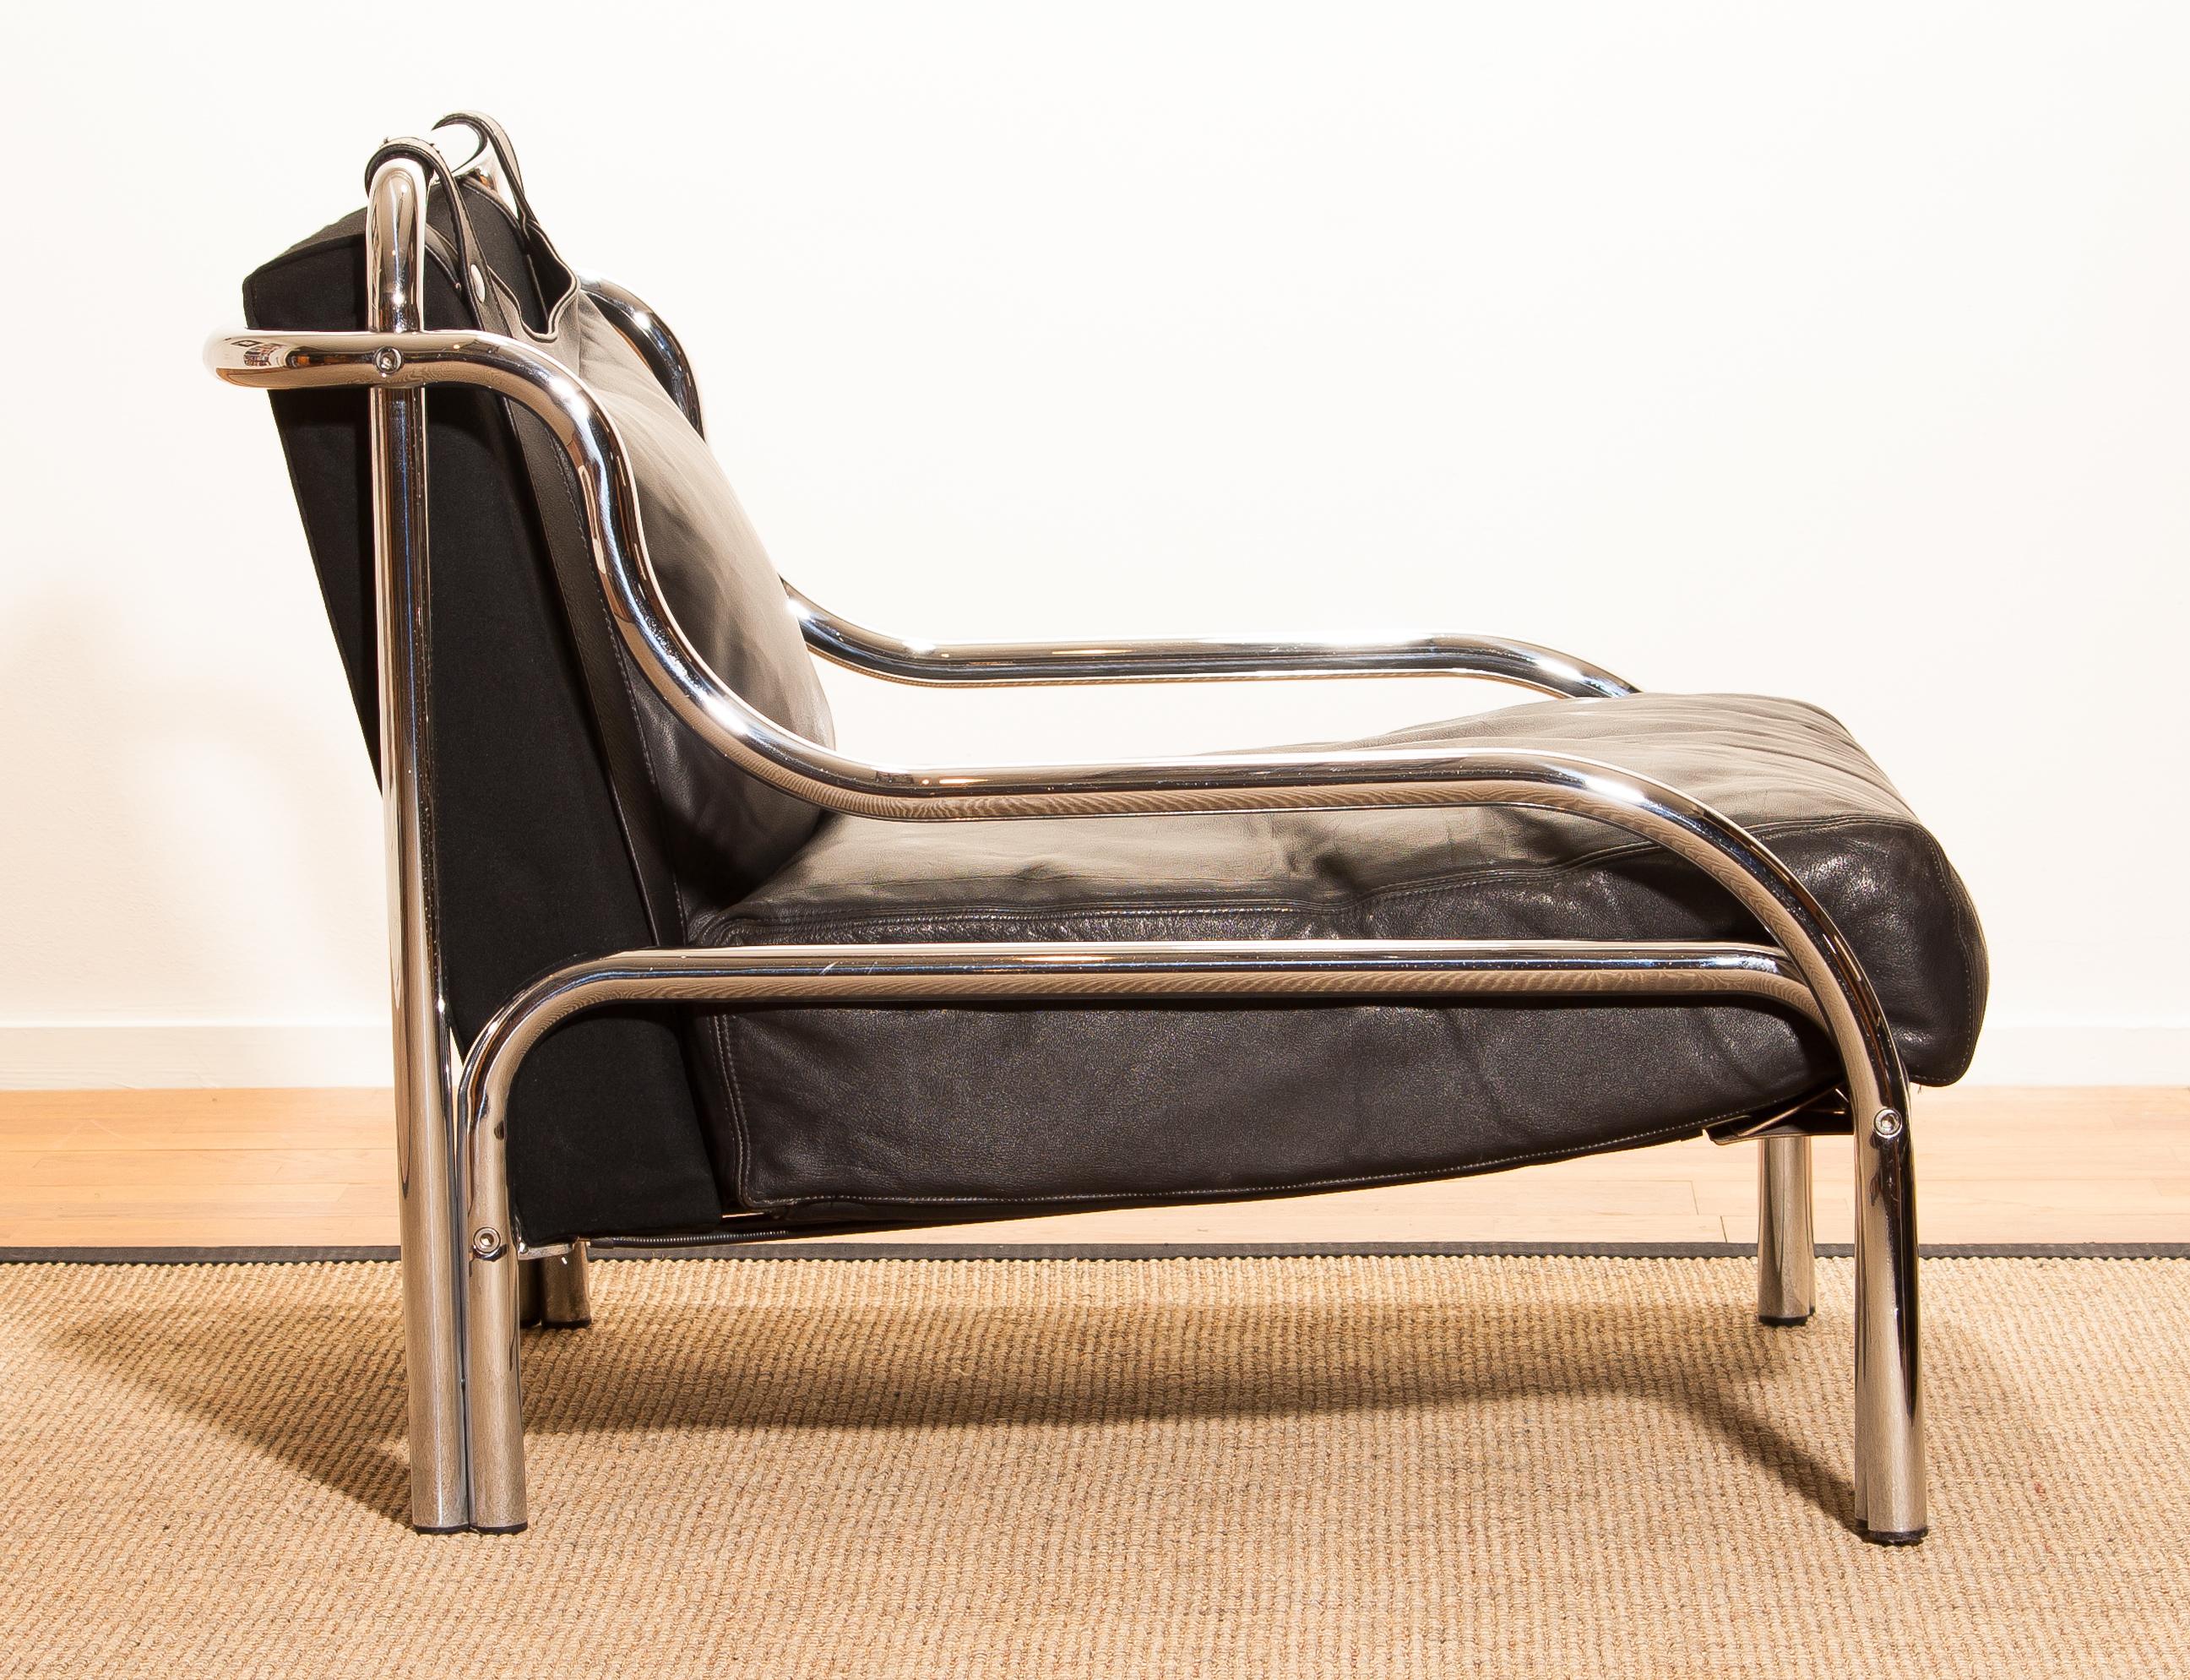 1960s, Leather and Chrome Lounge Chair by Gae Aulenti for Poltronova 4